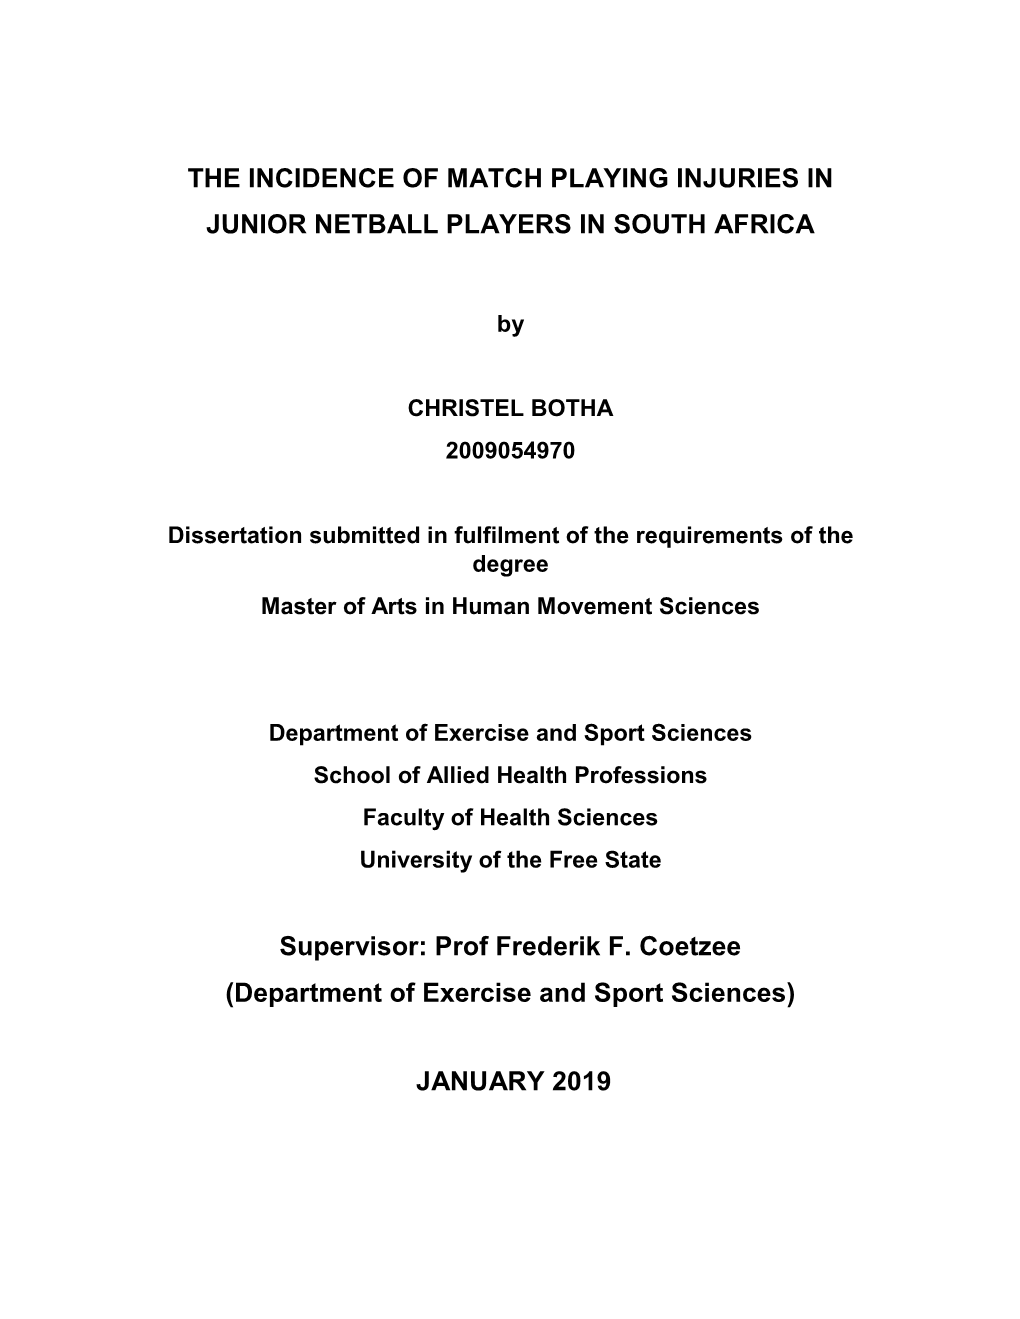 The Incidence of Match Playing Injuries in Junior Netball Players in South Africa